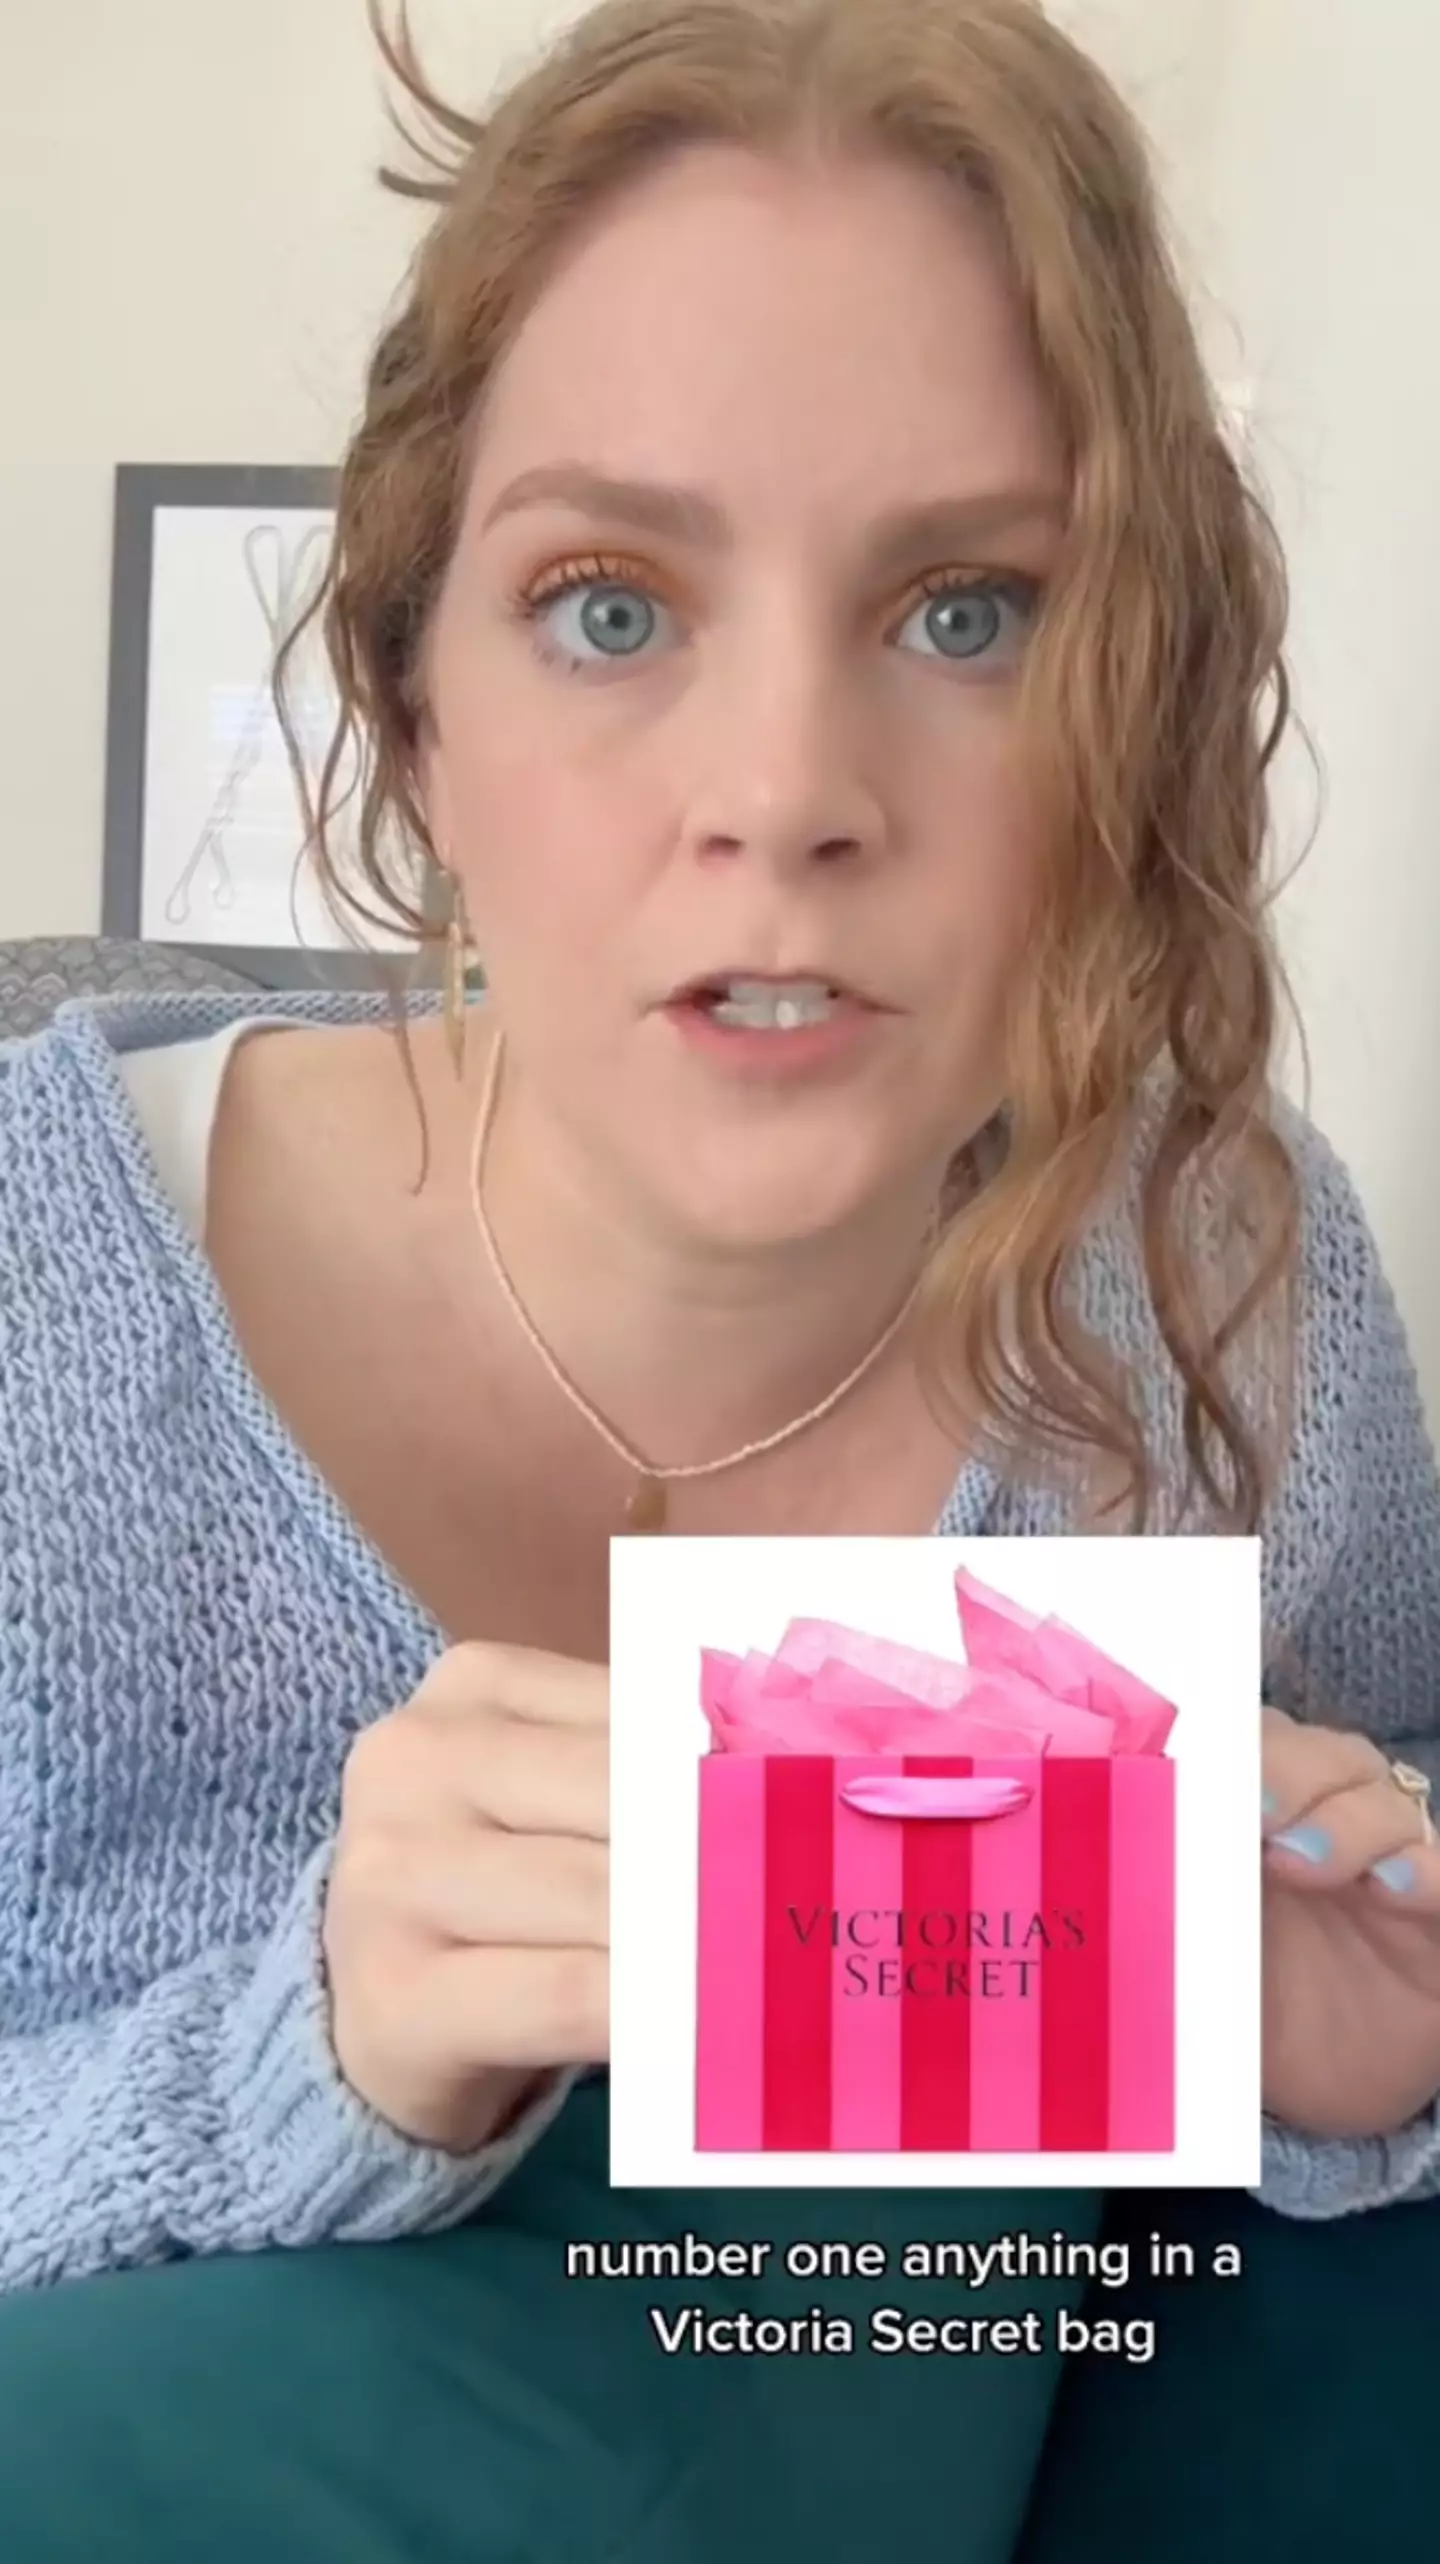 Anything in a Victoria's Secret bag is a no-go, even if it's not undies.